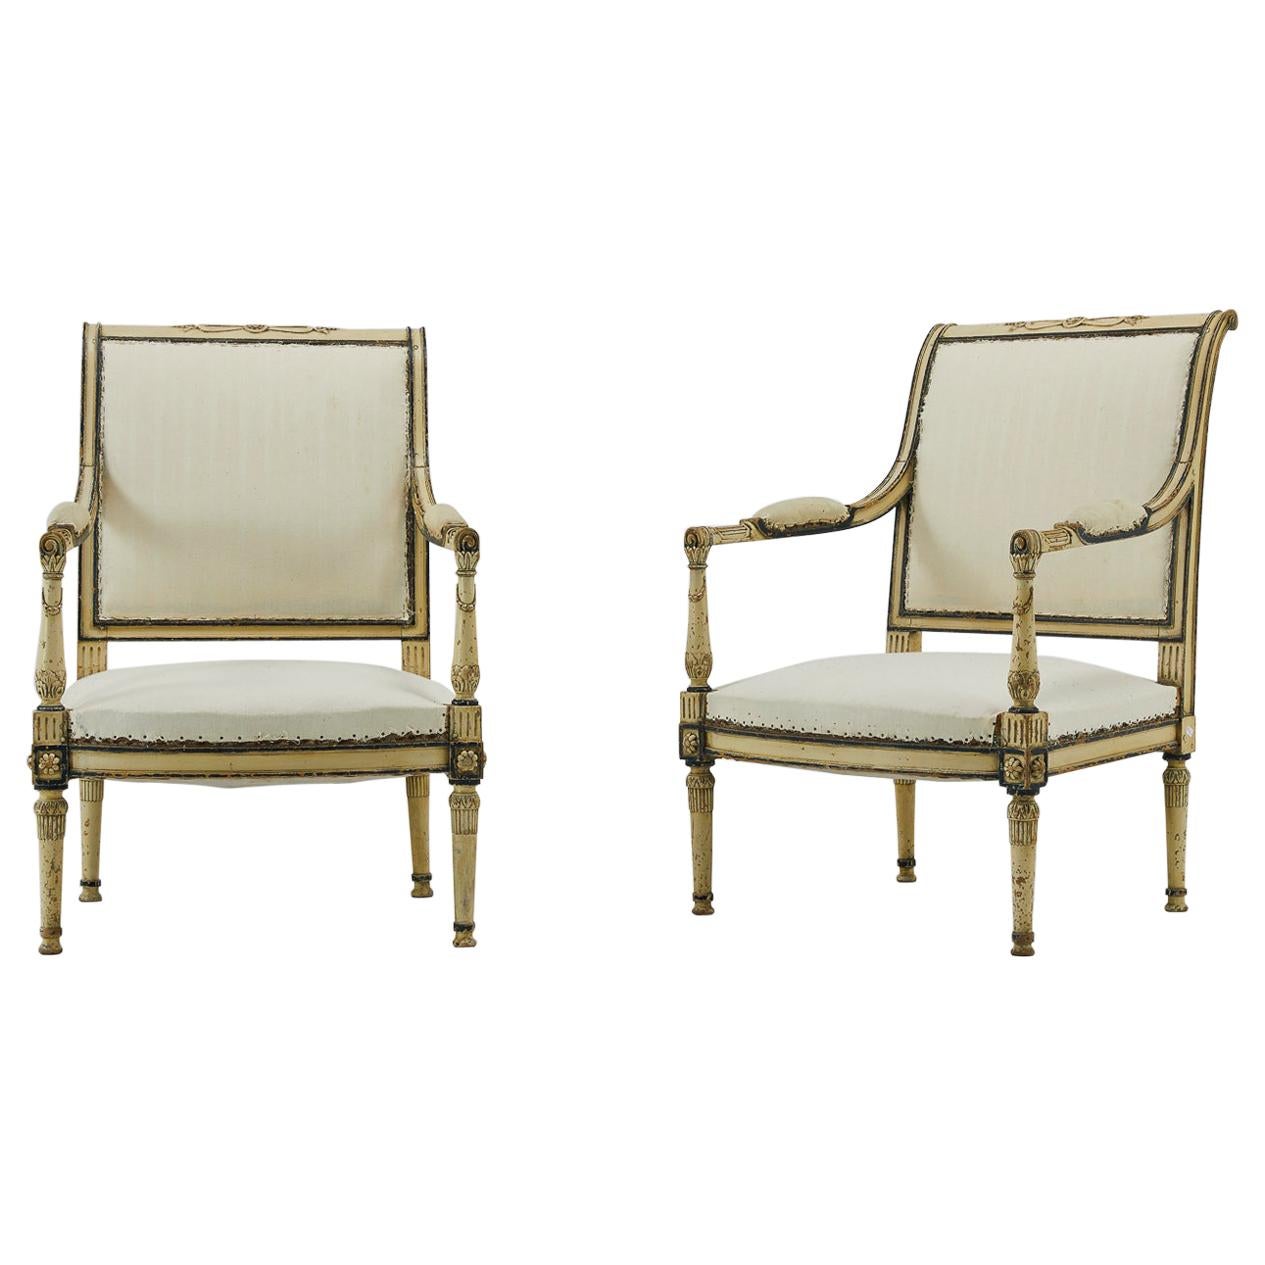 Pair of Early 19th Century French Painted Armchairs